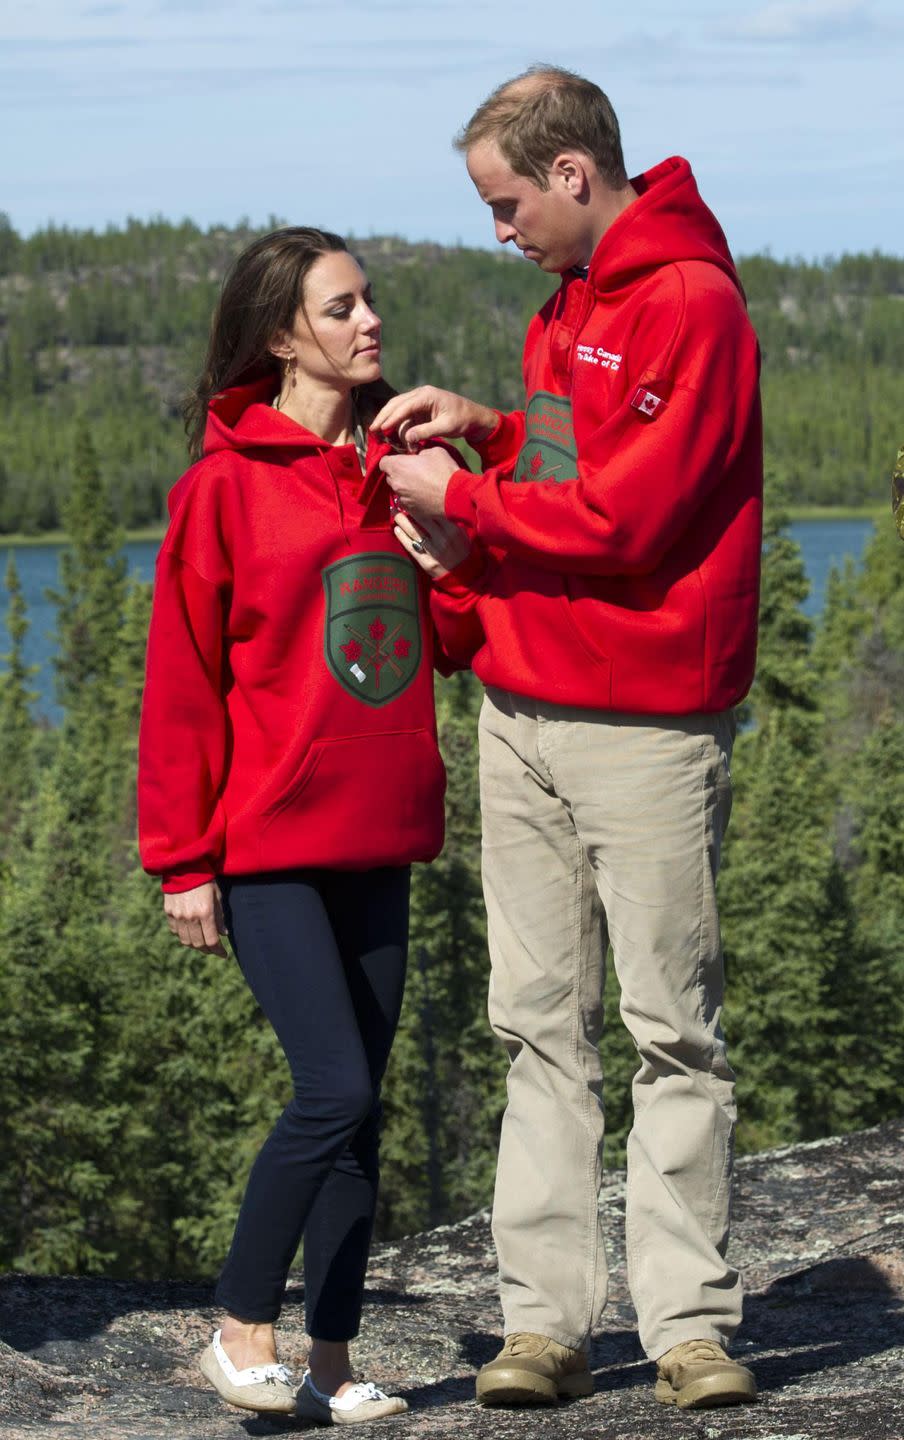 <p>Months after their royal wedding, the newlyweds wore matching Canadian Rangers jumpers after being made honourary members in Blatchford Lake, Northwest Territories, Canada. The trip marked their first official holiday as a married couple, July 2011 .</p>